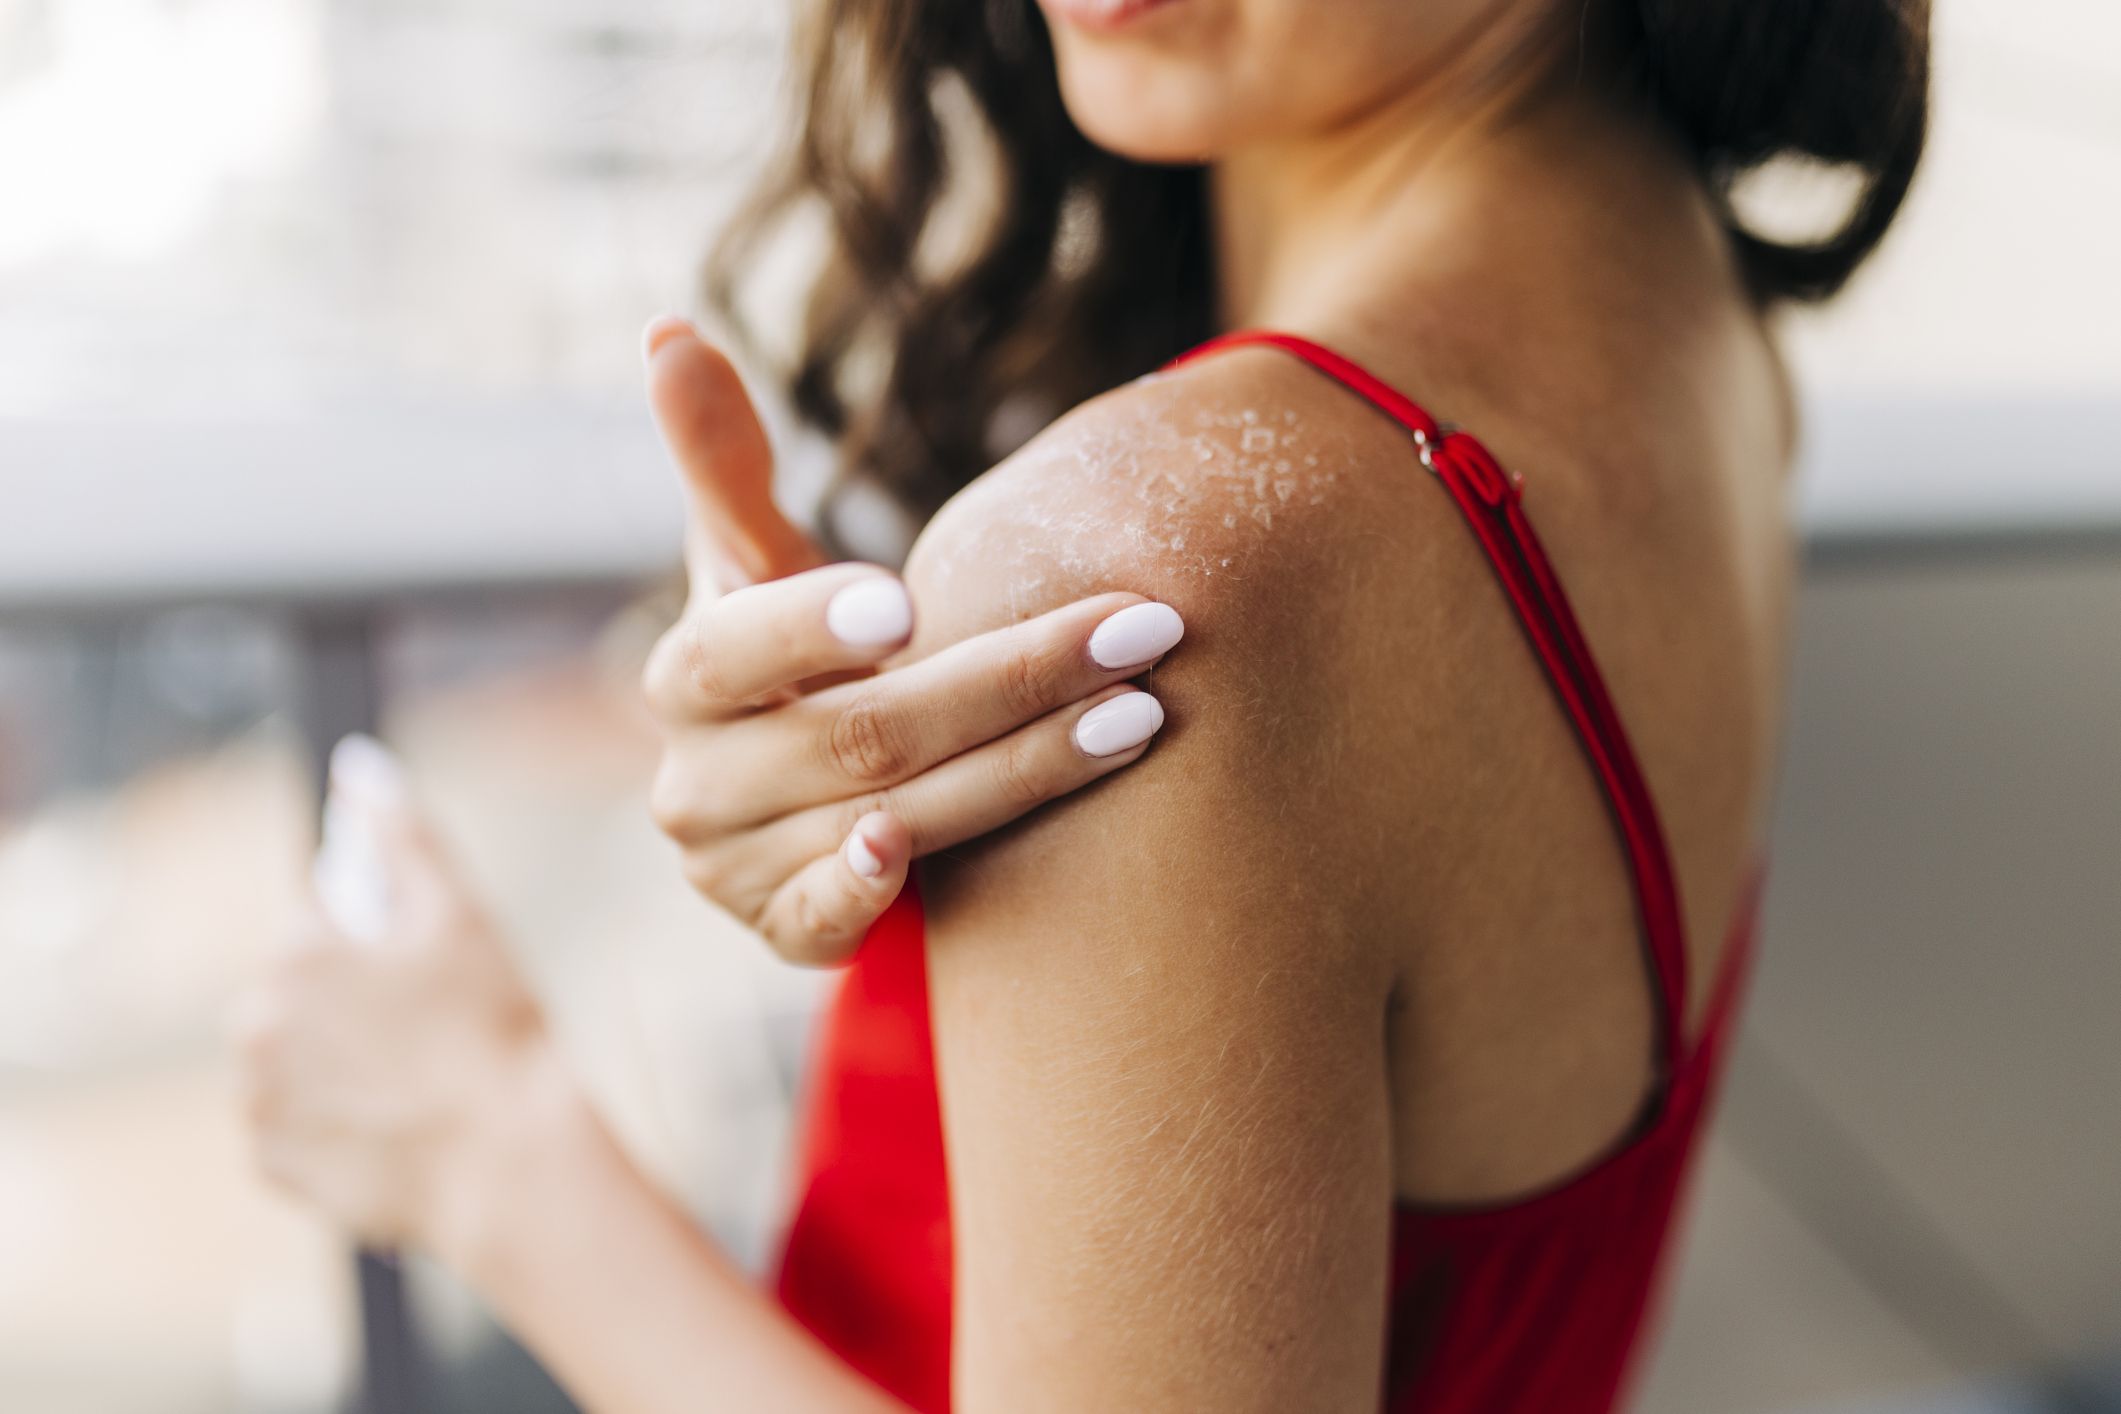 How to Get Rid of Heat Rash Quickly, According to Dermatologists